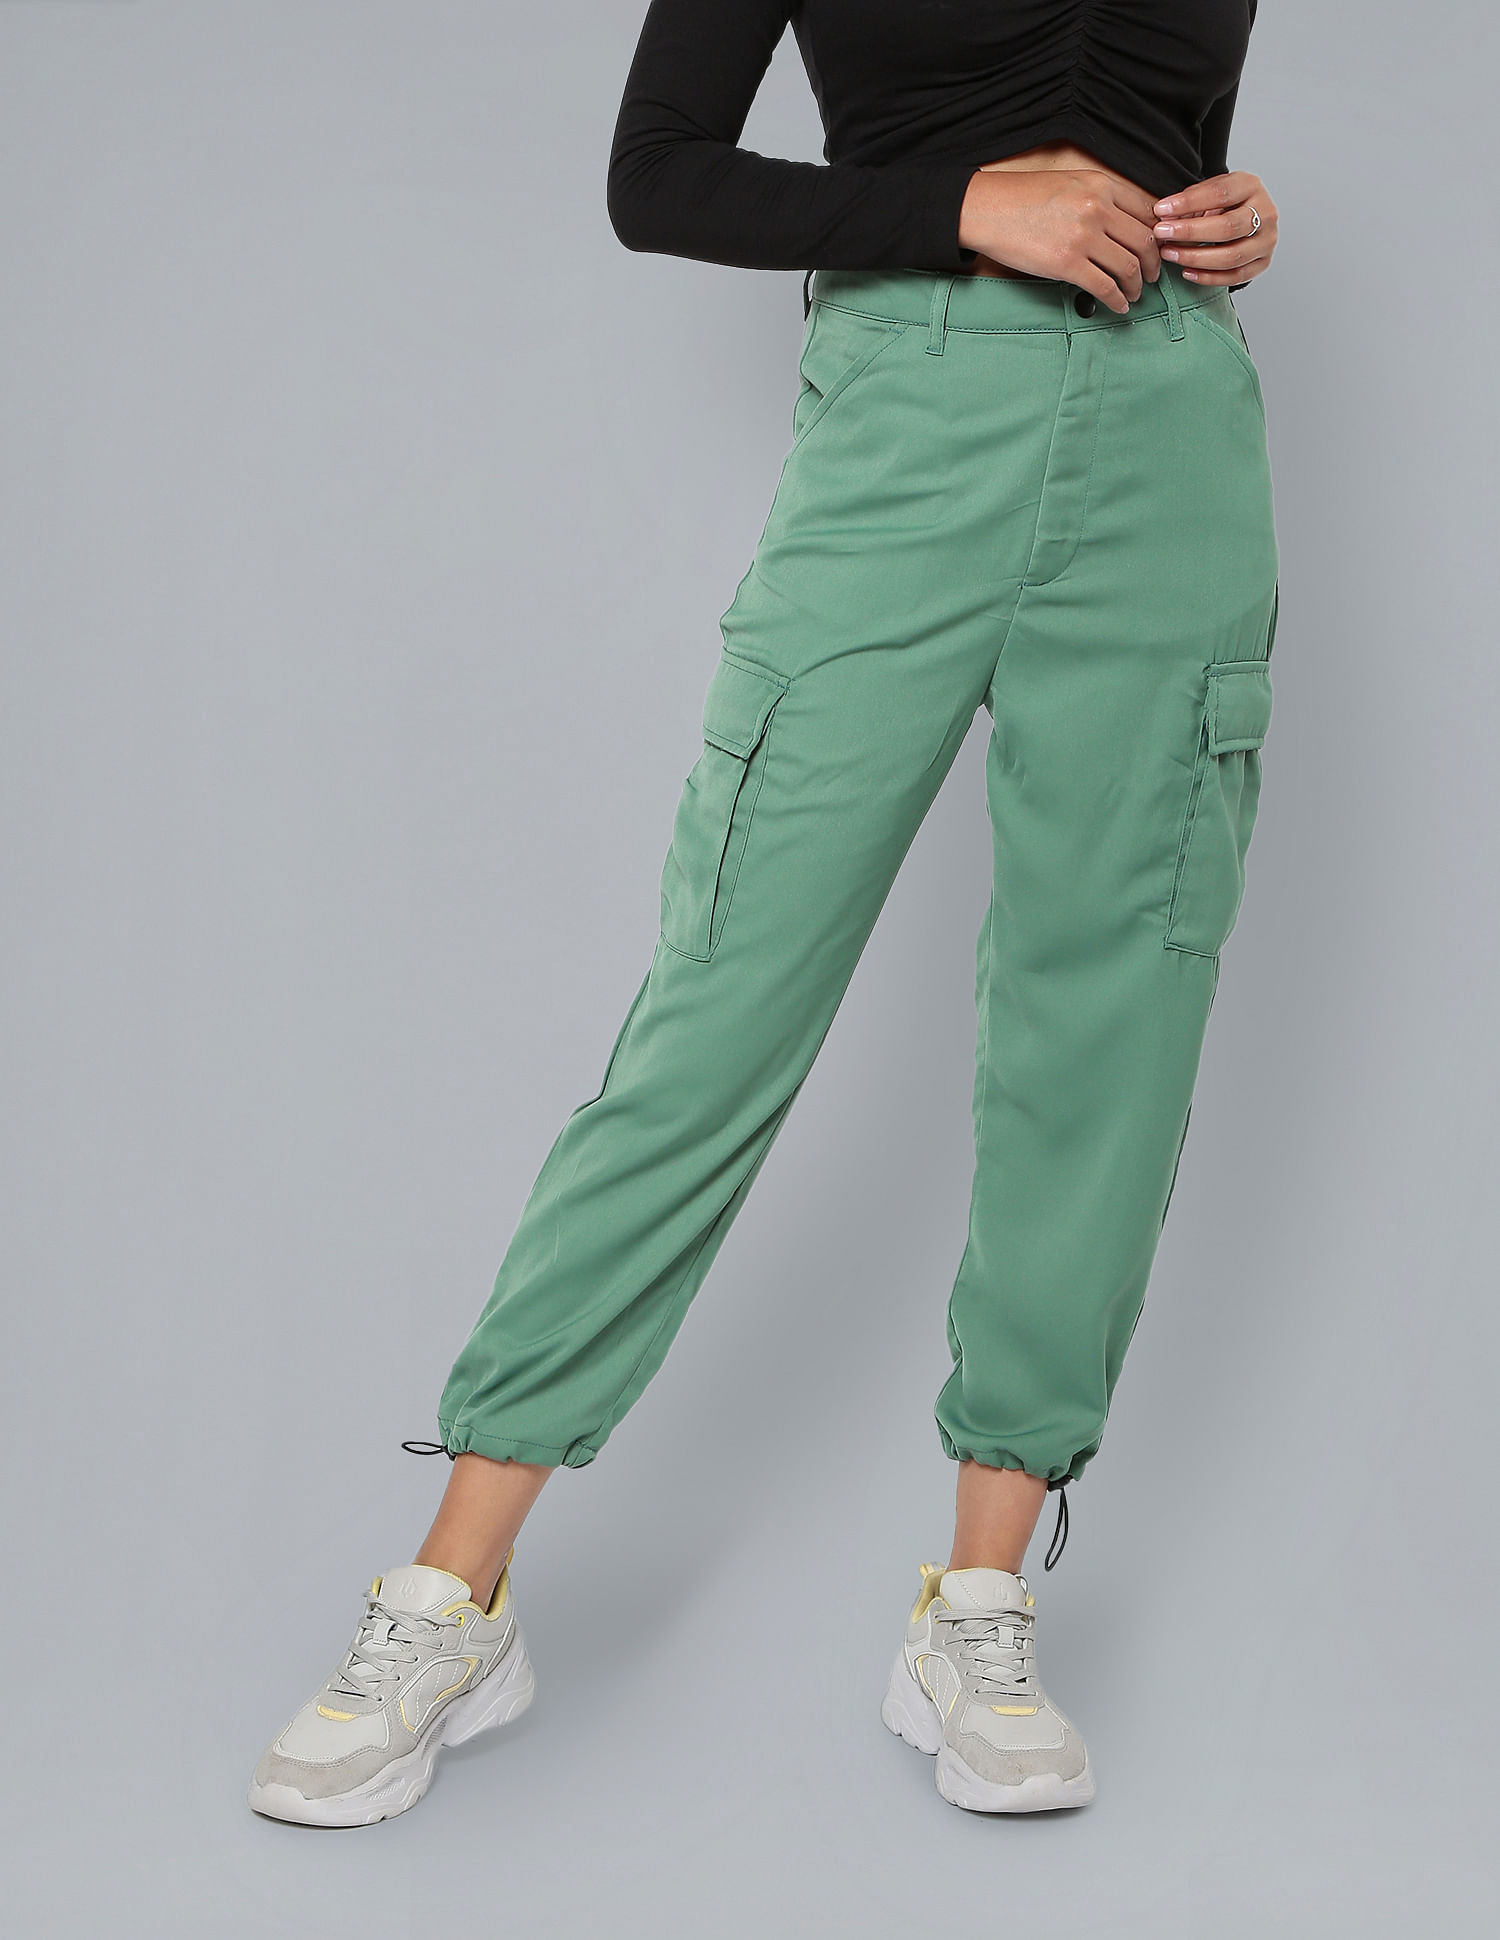 Ladies Cargo Pants - Army Green | Shop Today. Get it Tomorrow! |  takealot.com